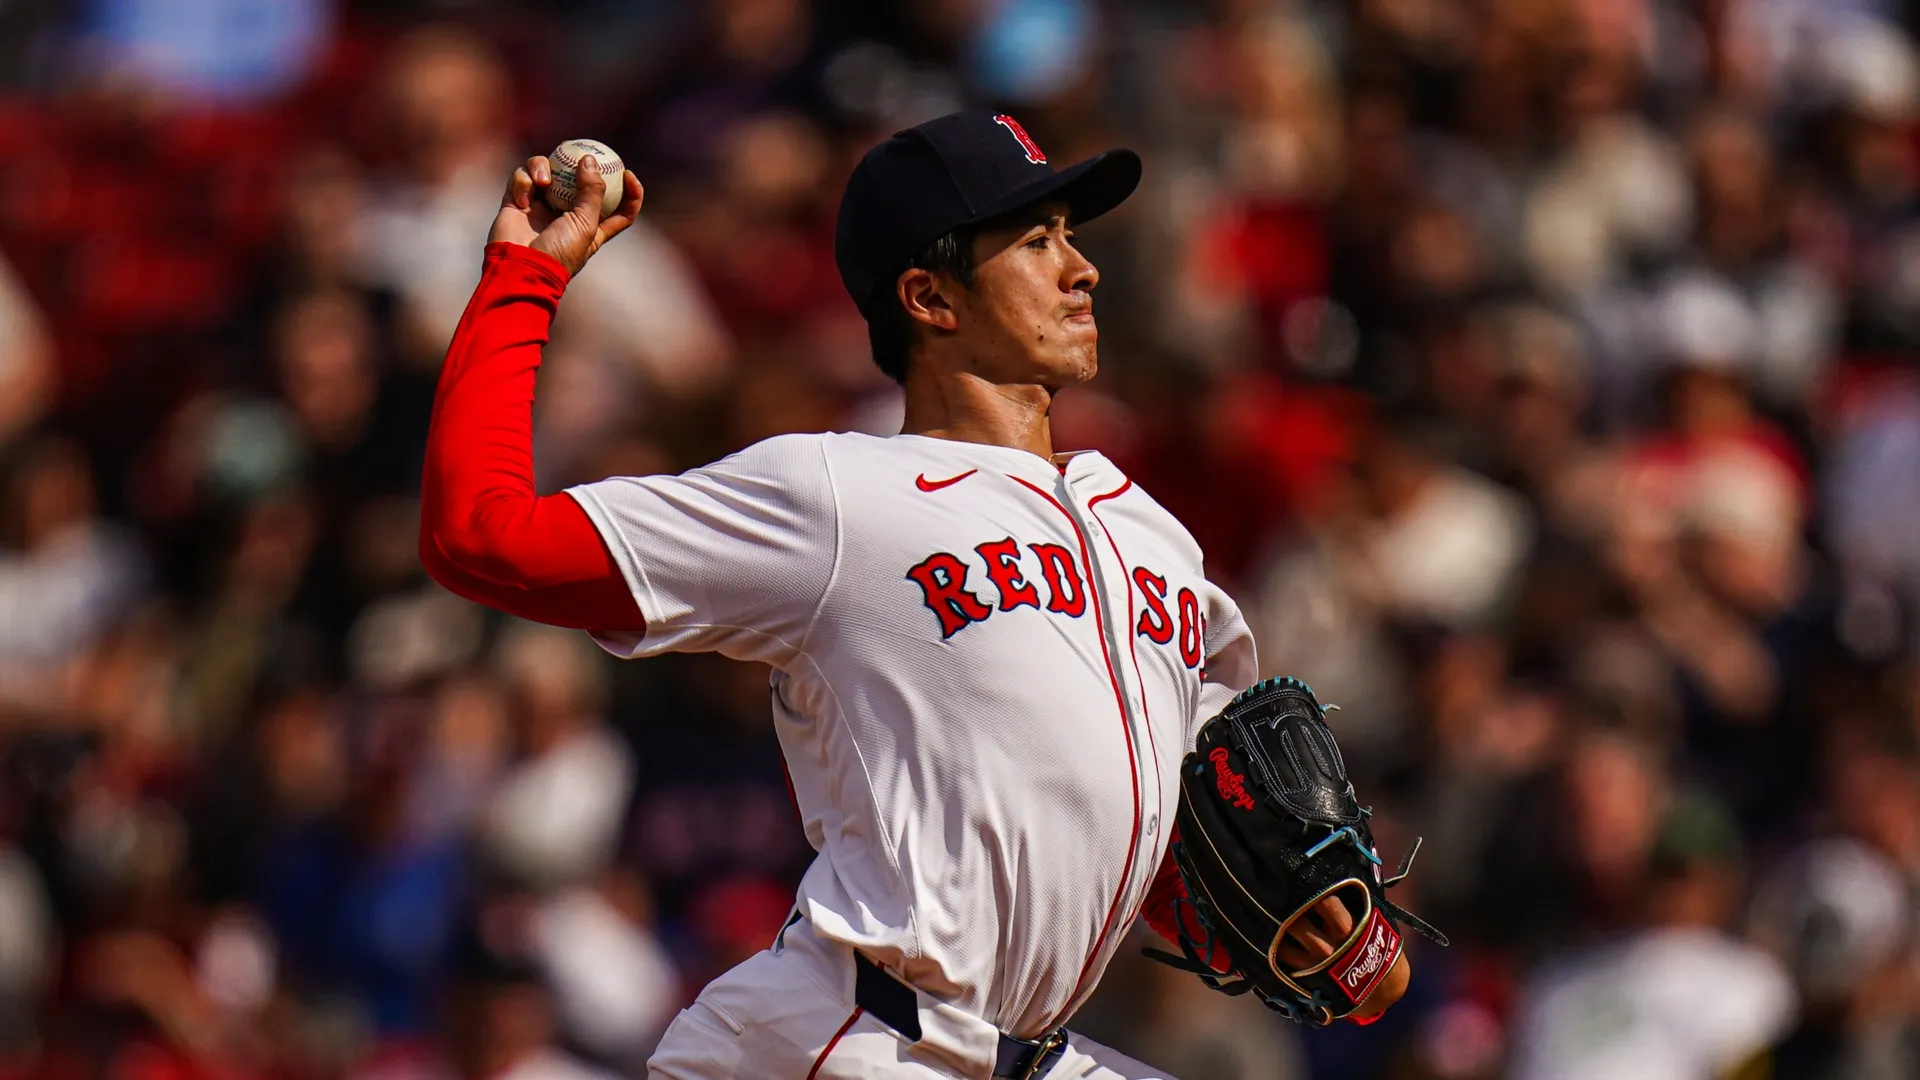 BREAKING NEWS: Red sox new stand out pitcher makes history in his debut ...